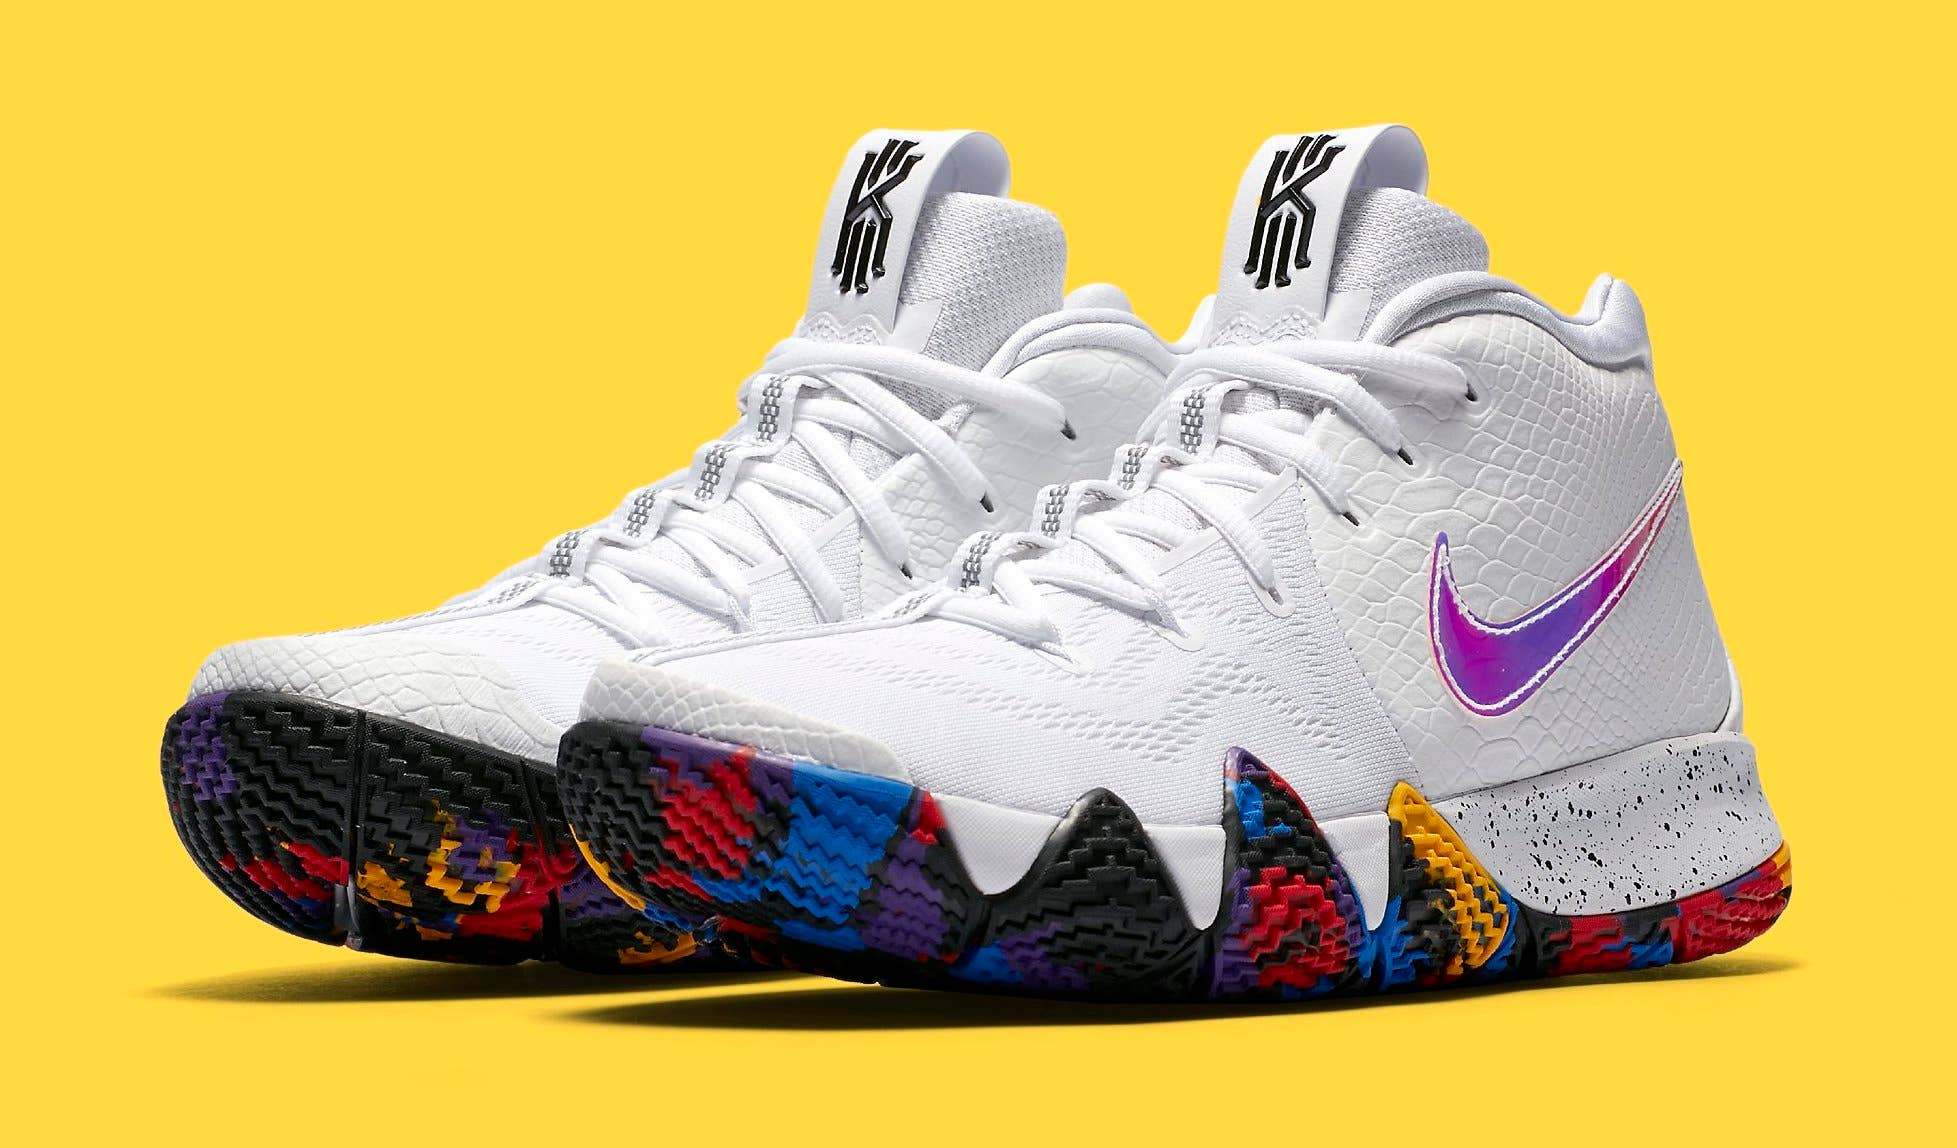 Nike Kyrie 4 'March Madness' 943804 104 (Pair)